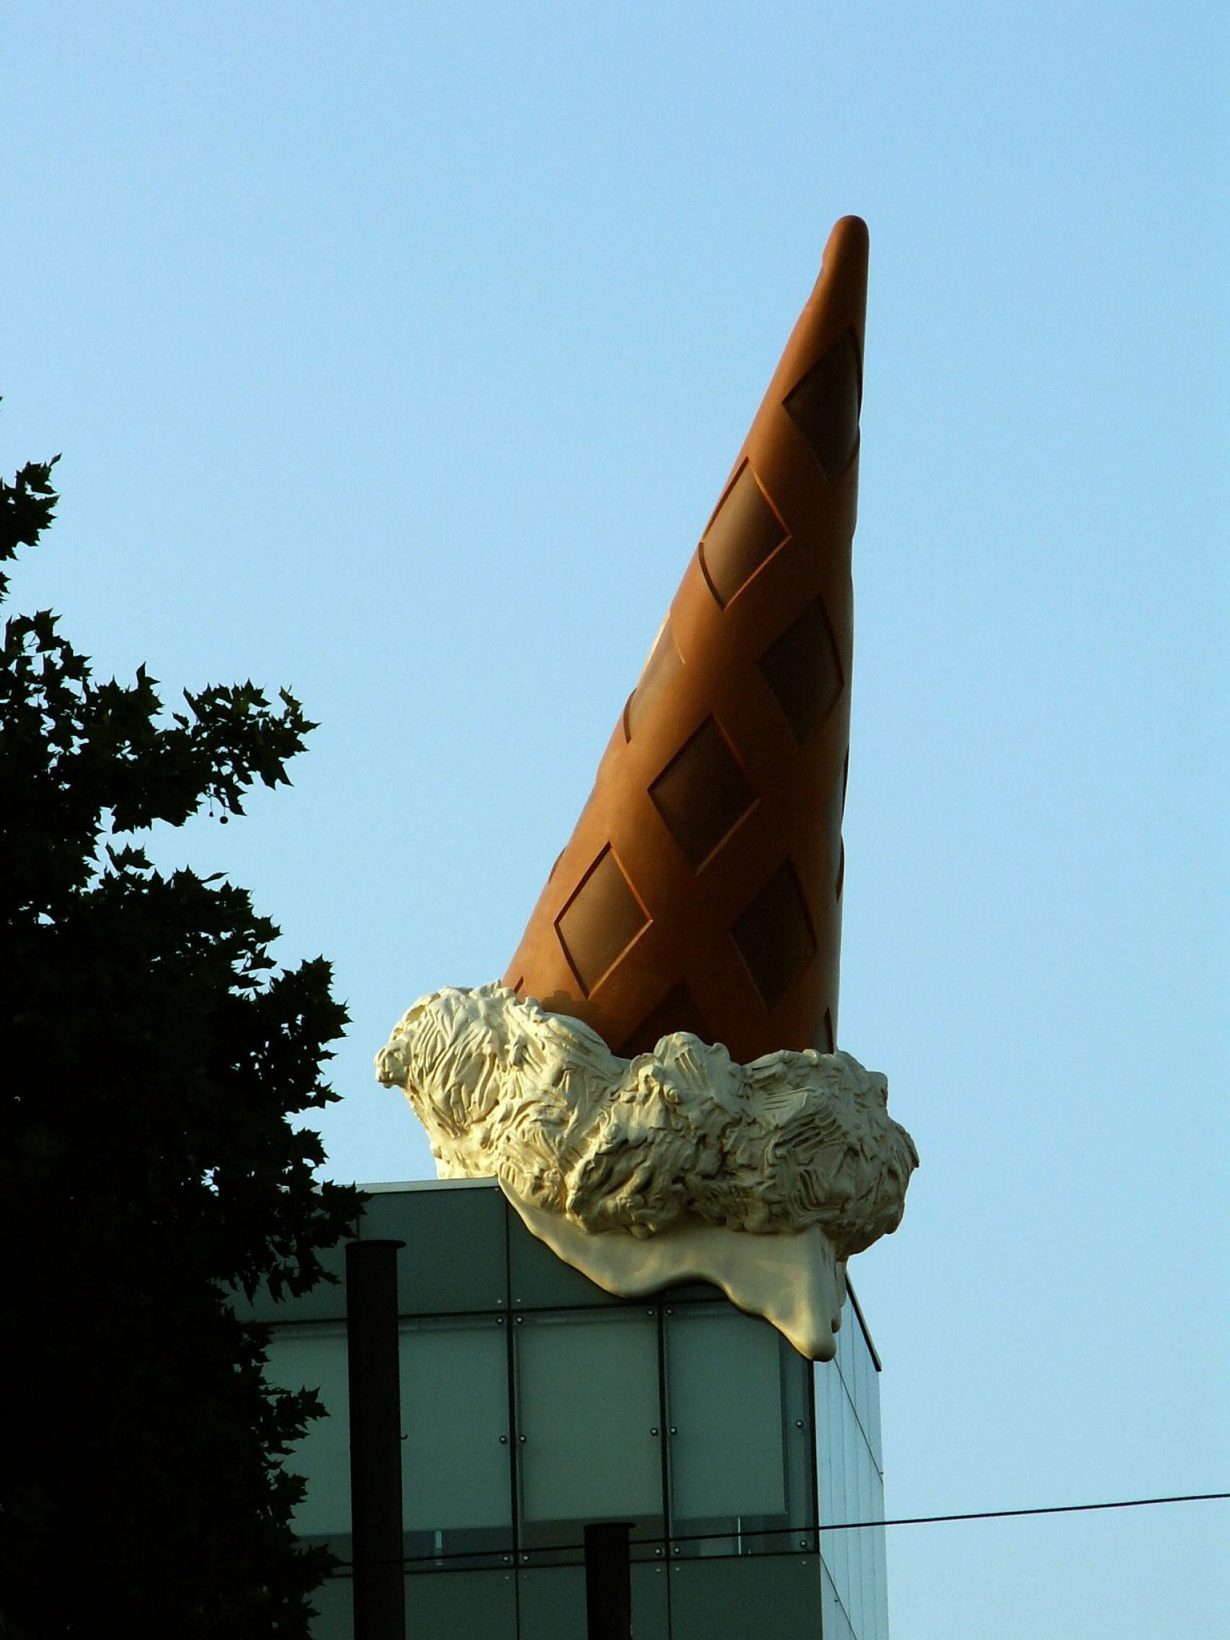 Claes Oldenburg, known for his oversized Pop art sculpture, 1929–2022 -  ArtReview